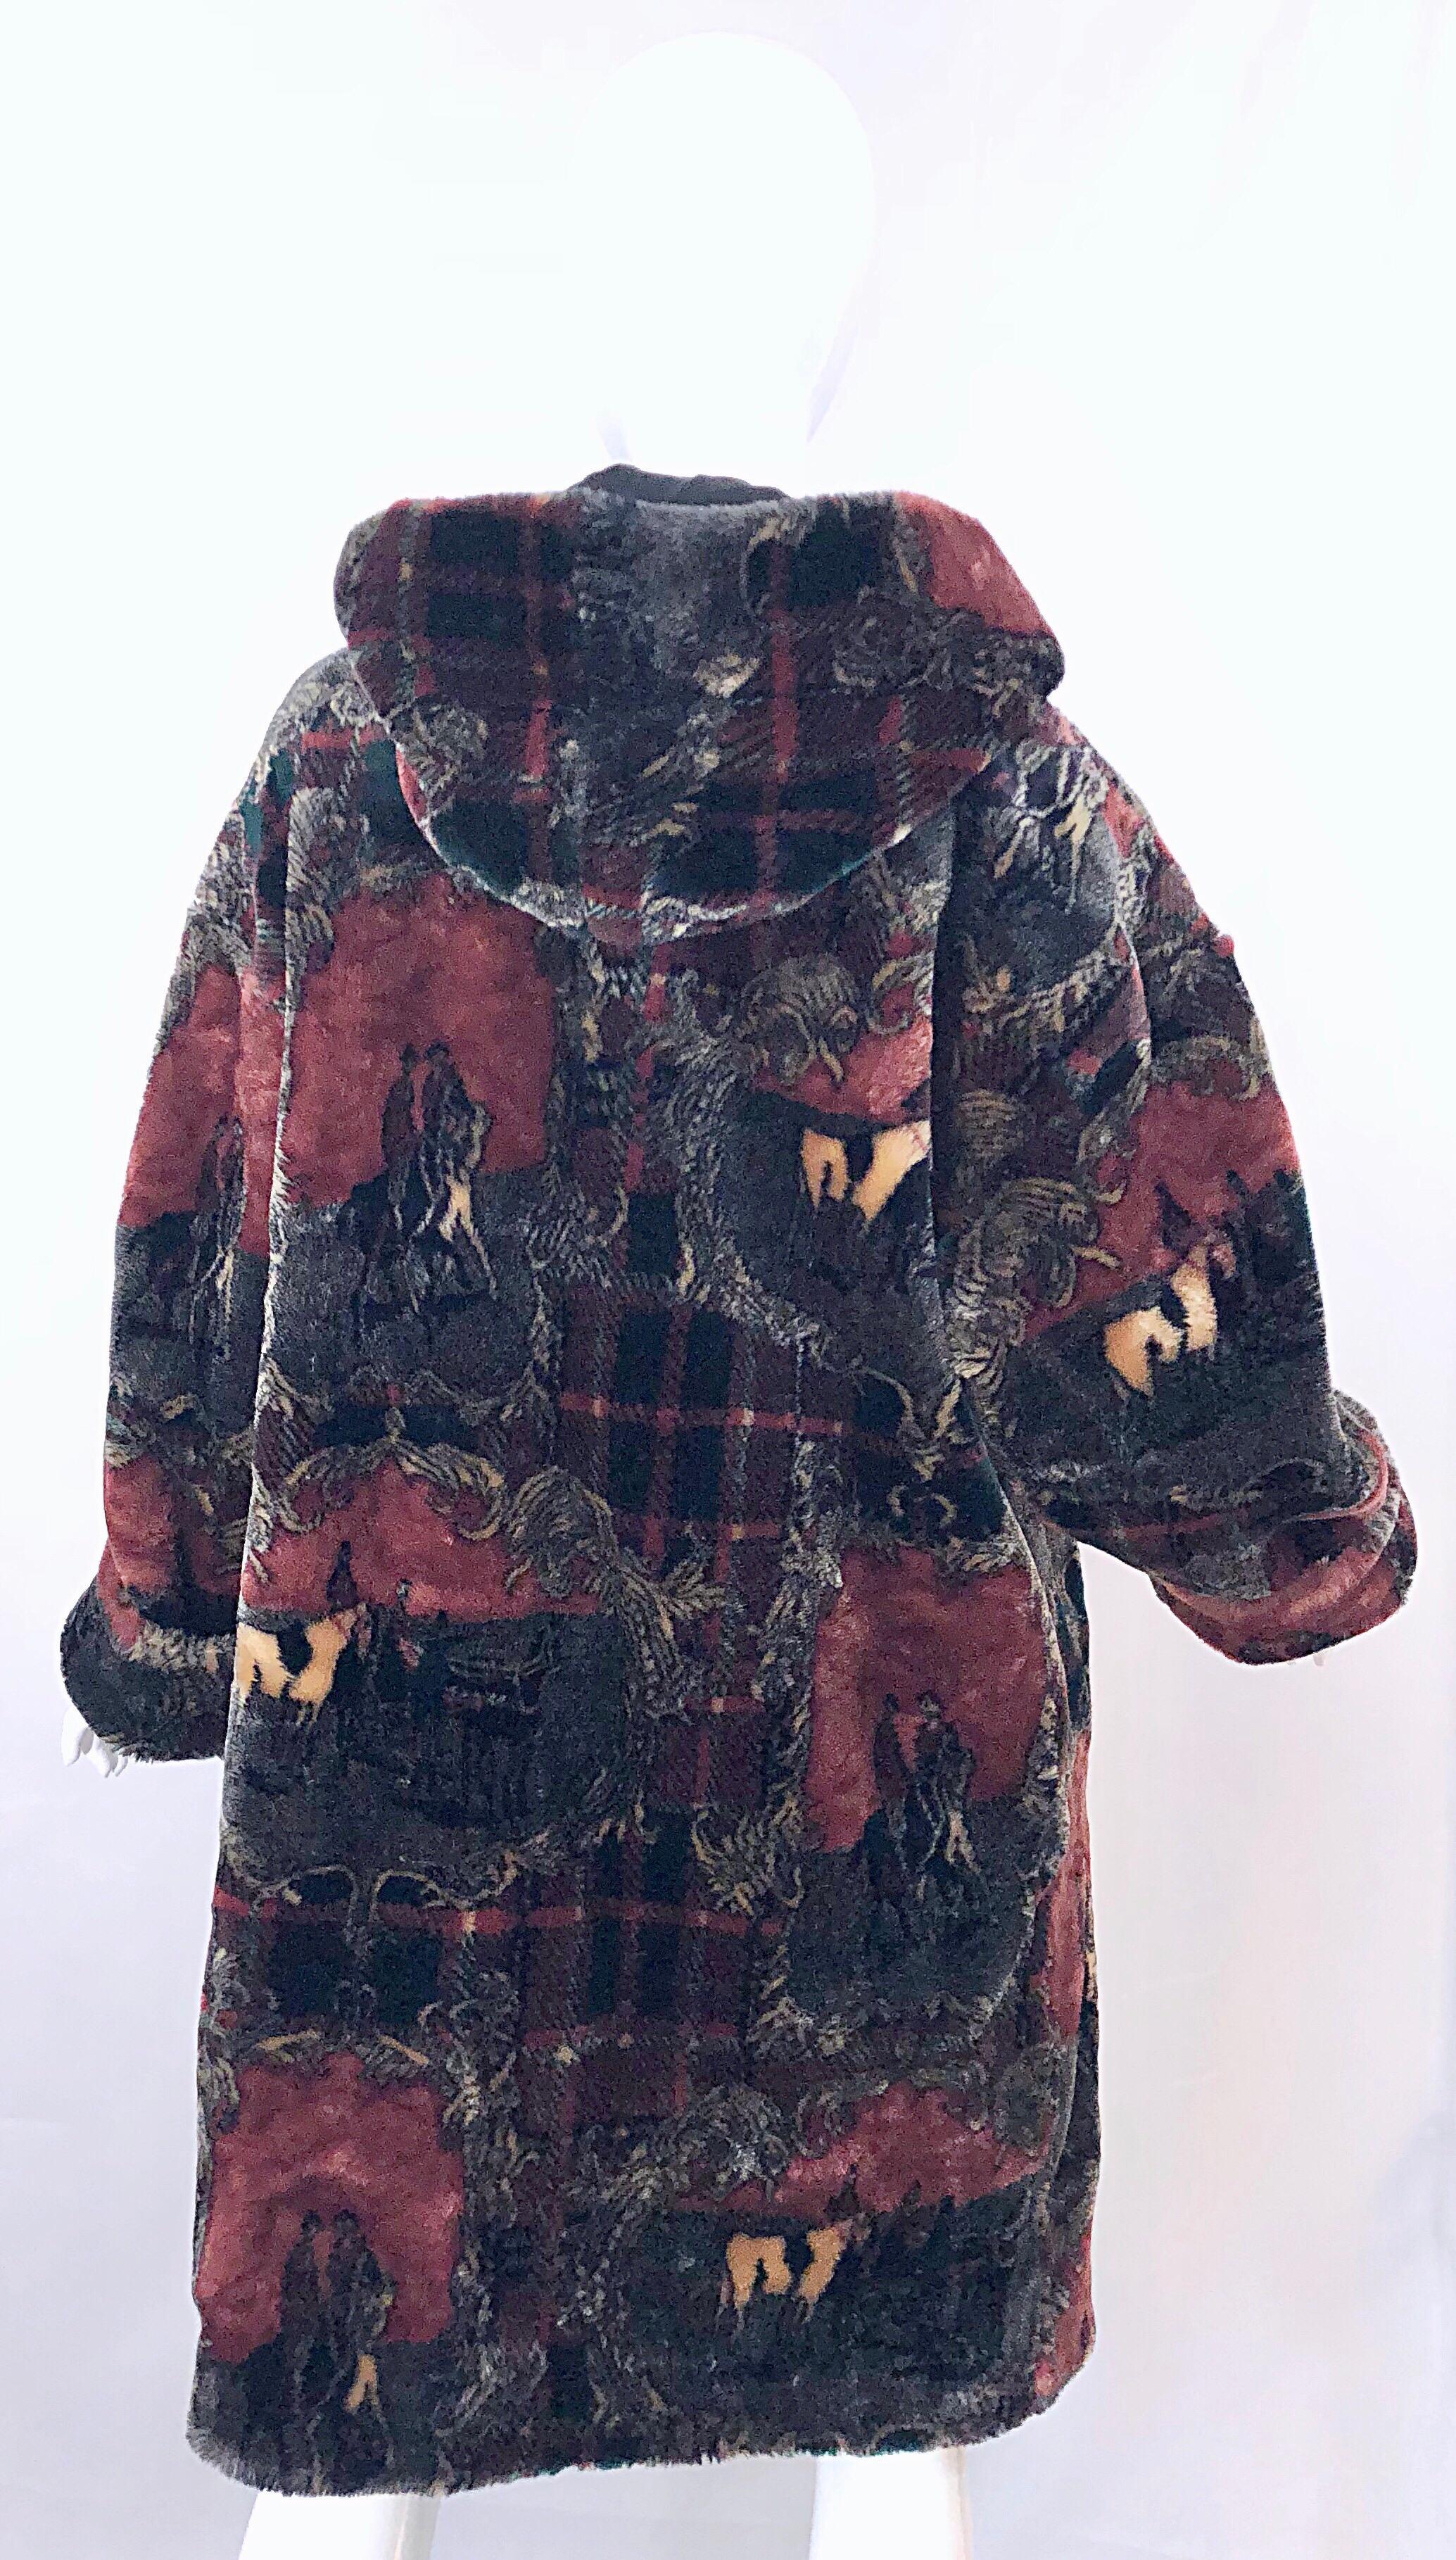 Extra Plush Vintage Faux Fur Equestrian Plaid Print Oversized Hooded Jacket For Sale 2